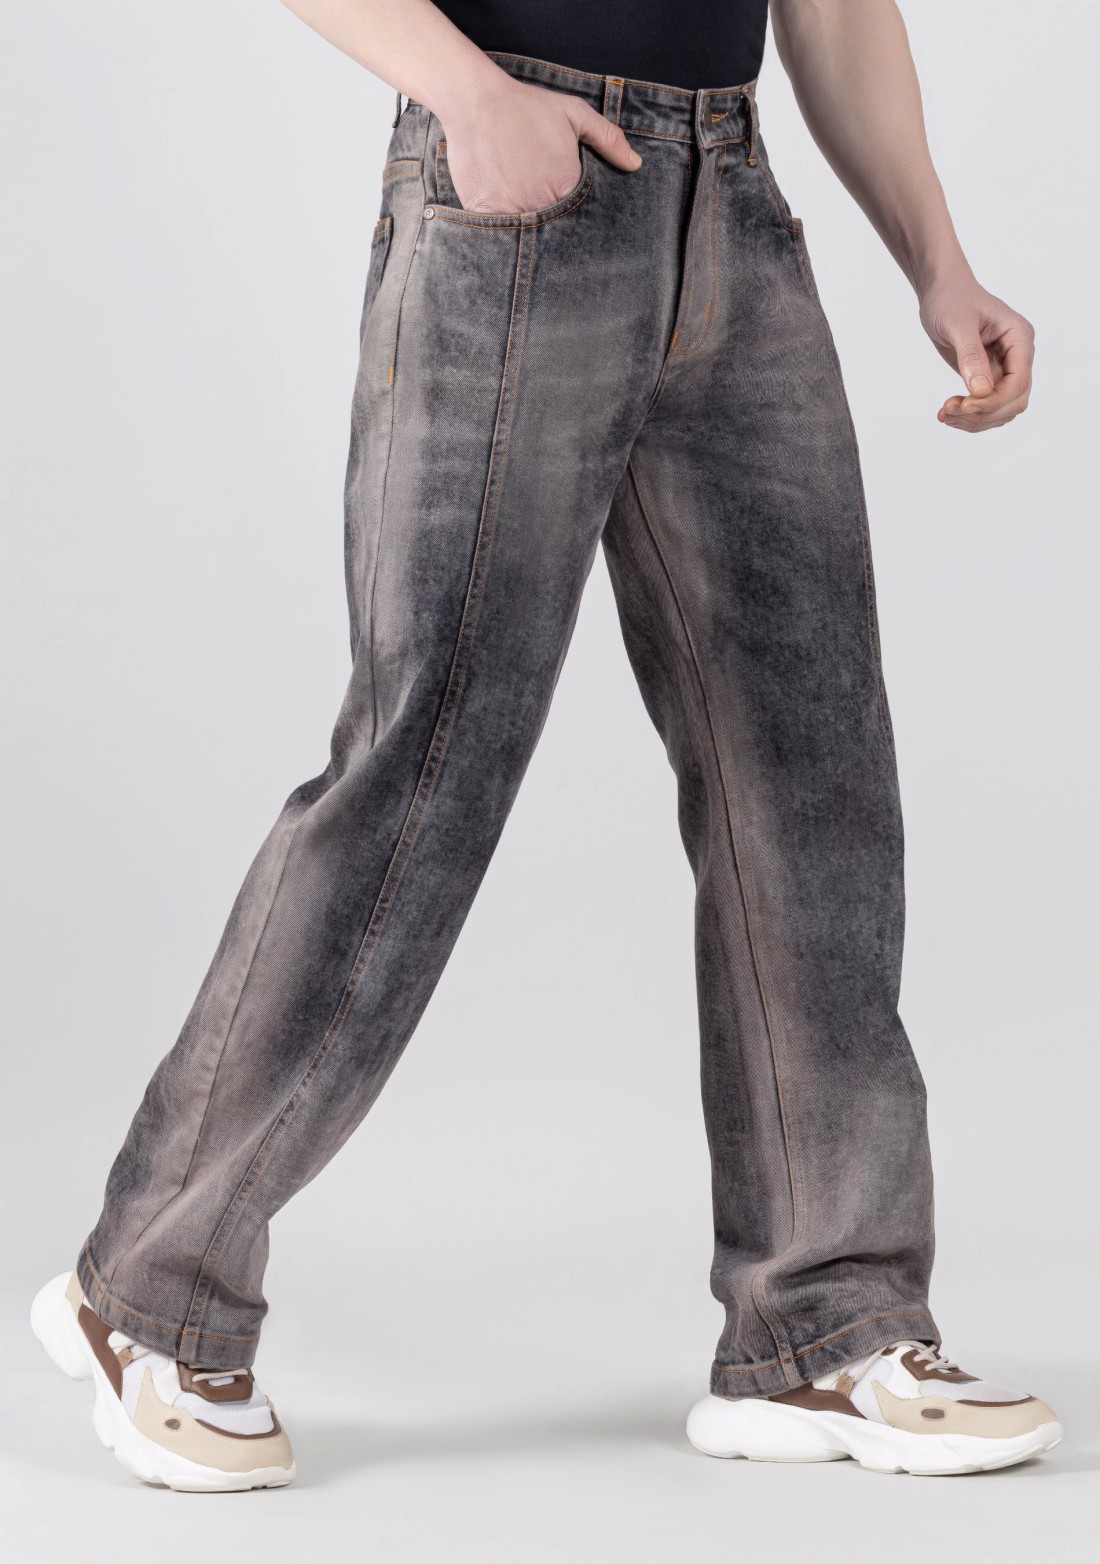 Blackish Brown Wide Leg Cut and Sew Men’s Jeans